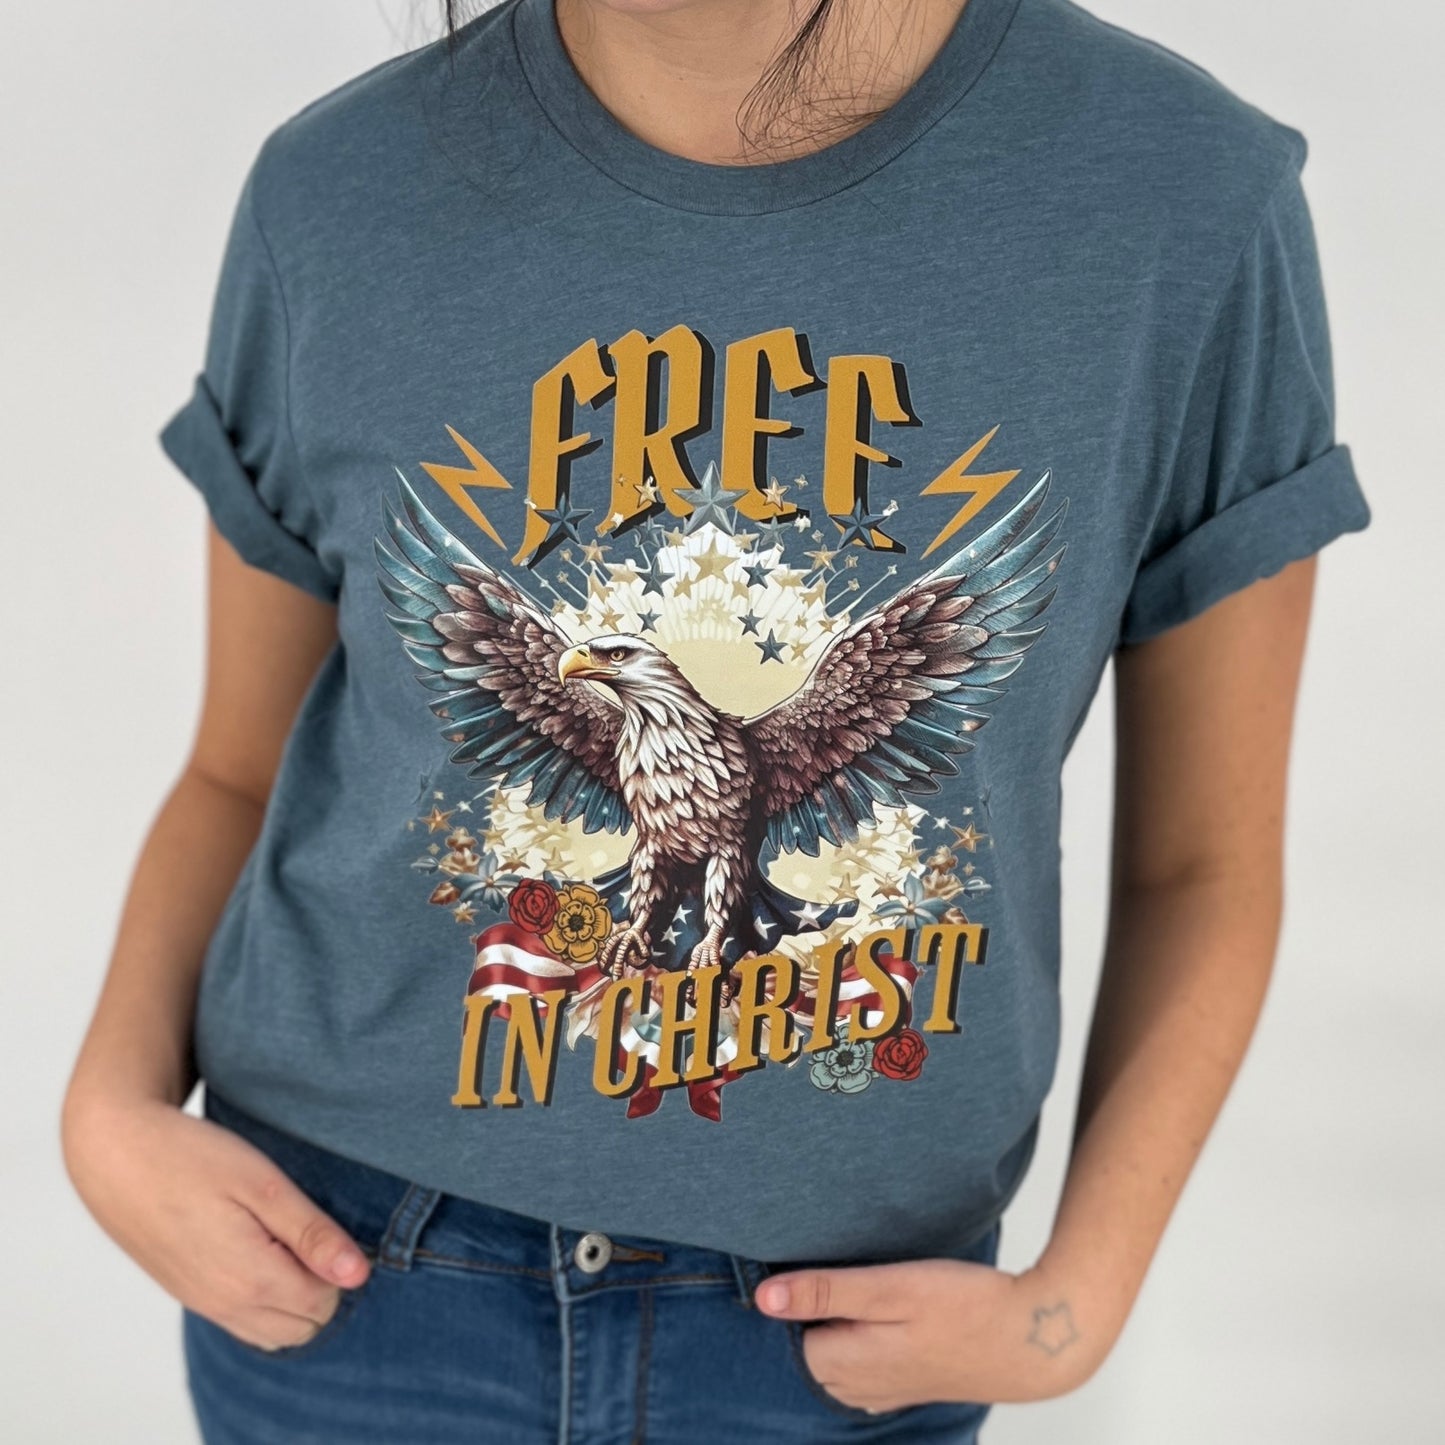 Free in Christ tee